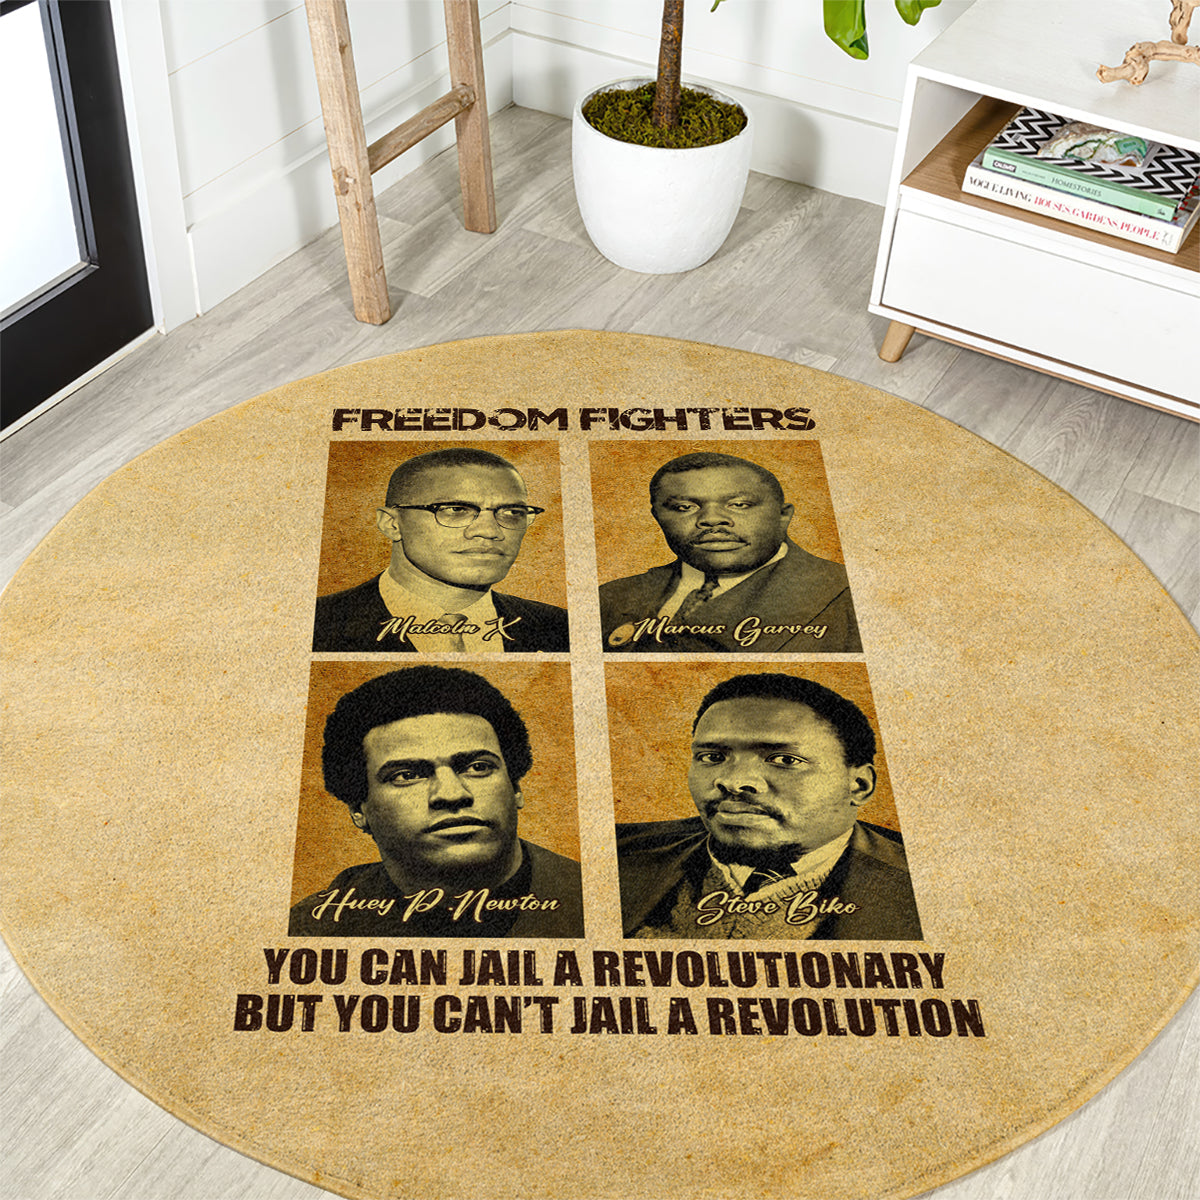 Freedom Fighters Round Carpet Civil Rights Leaders Revolution